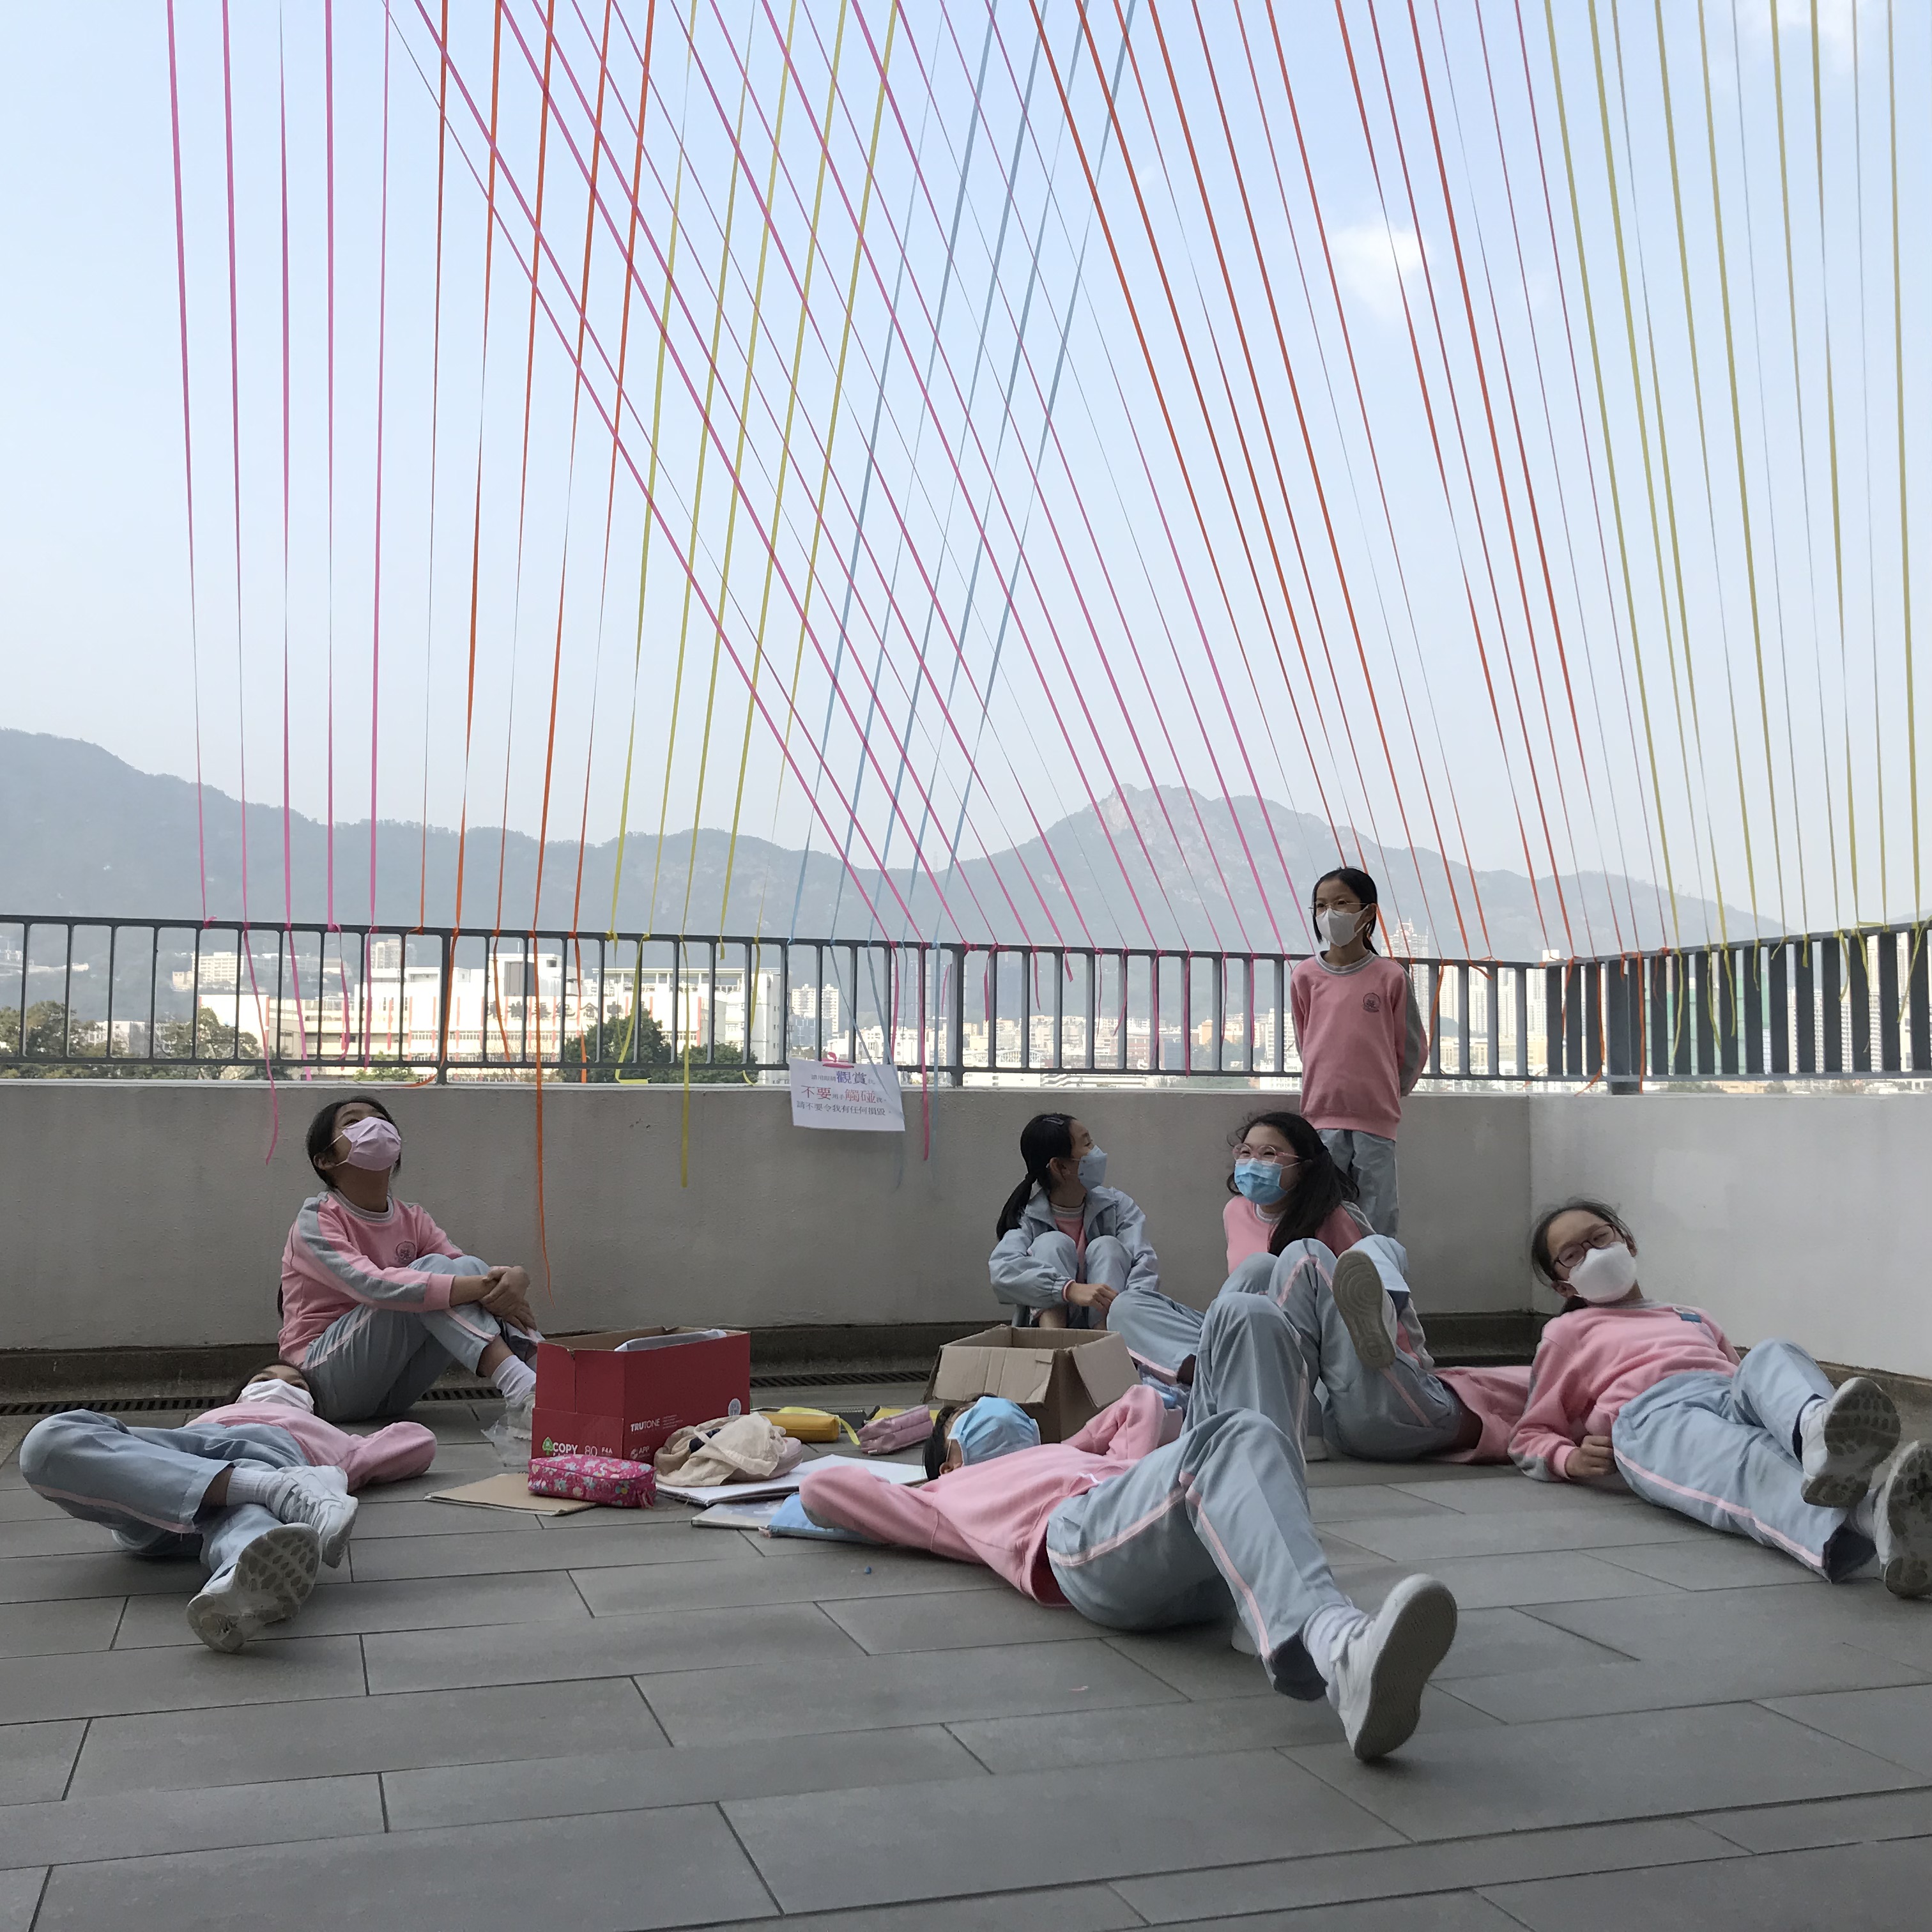 A group of students lying on the ground of a concrete balcony, looking up and there are colourful ropes coming from the ceiling down to the balcony ledge.